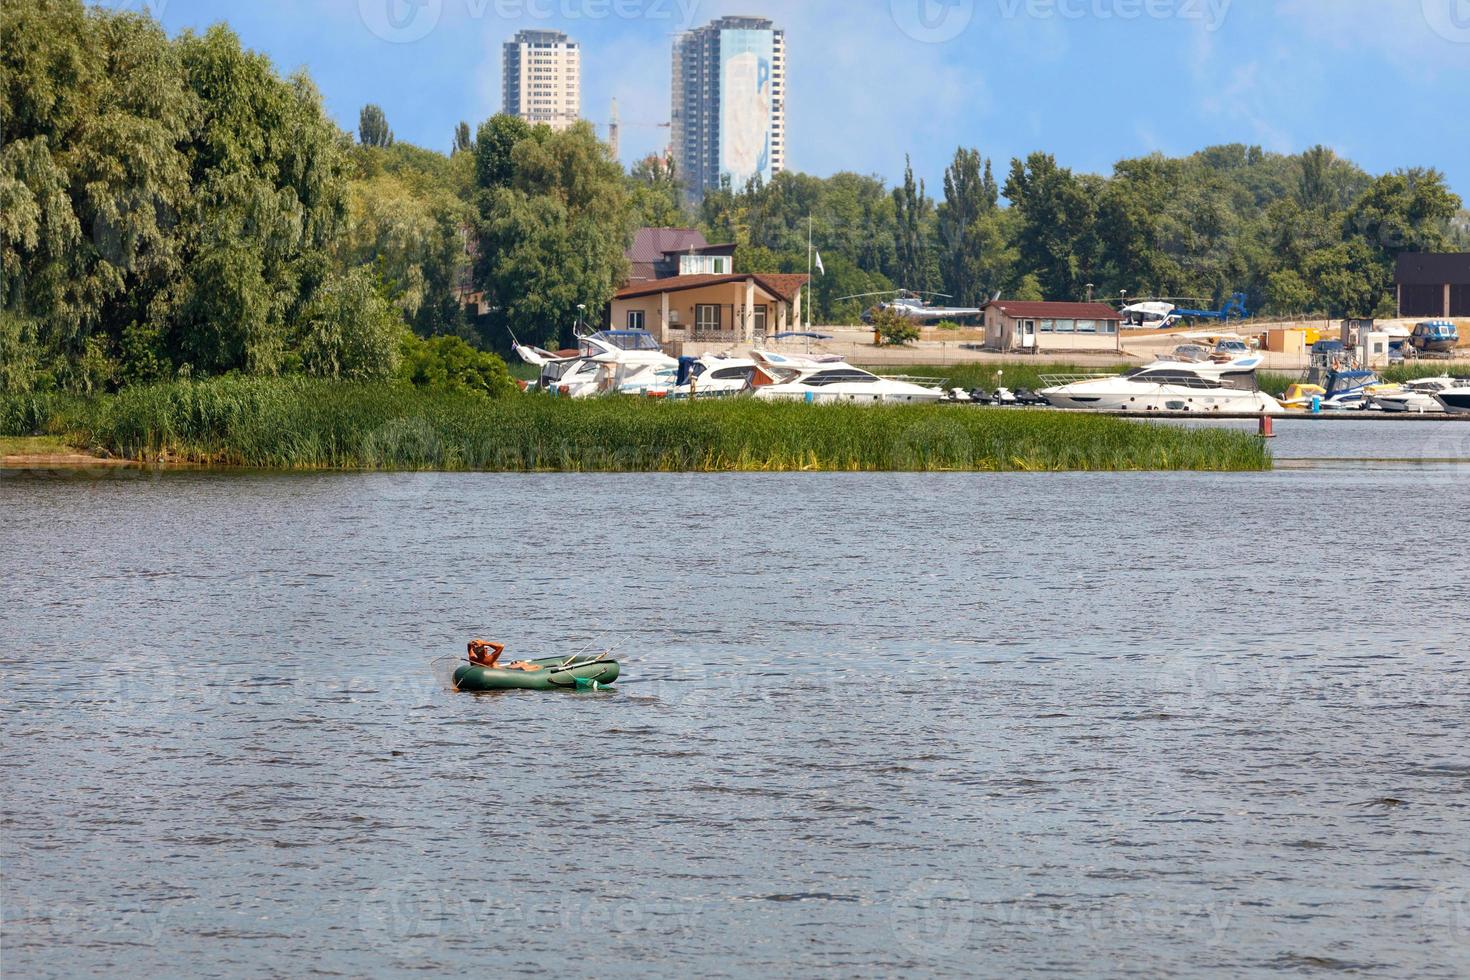 A fisherman on an inflatable rubber boat is fishing with fishing rods in the middle of the river on a sunny summer day. photo